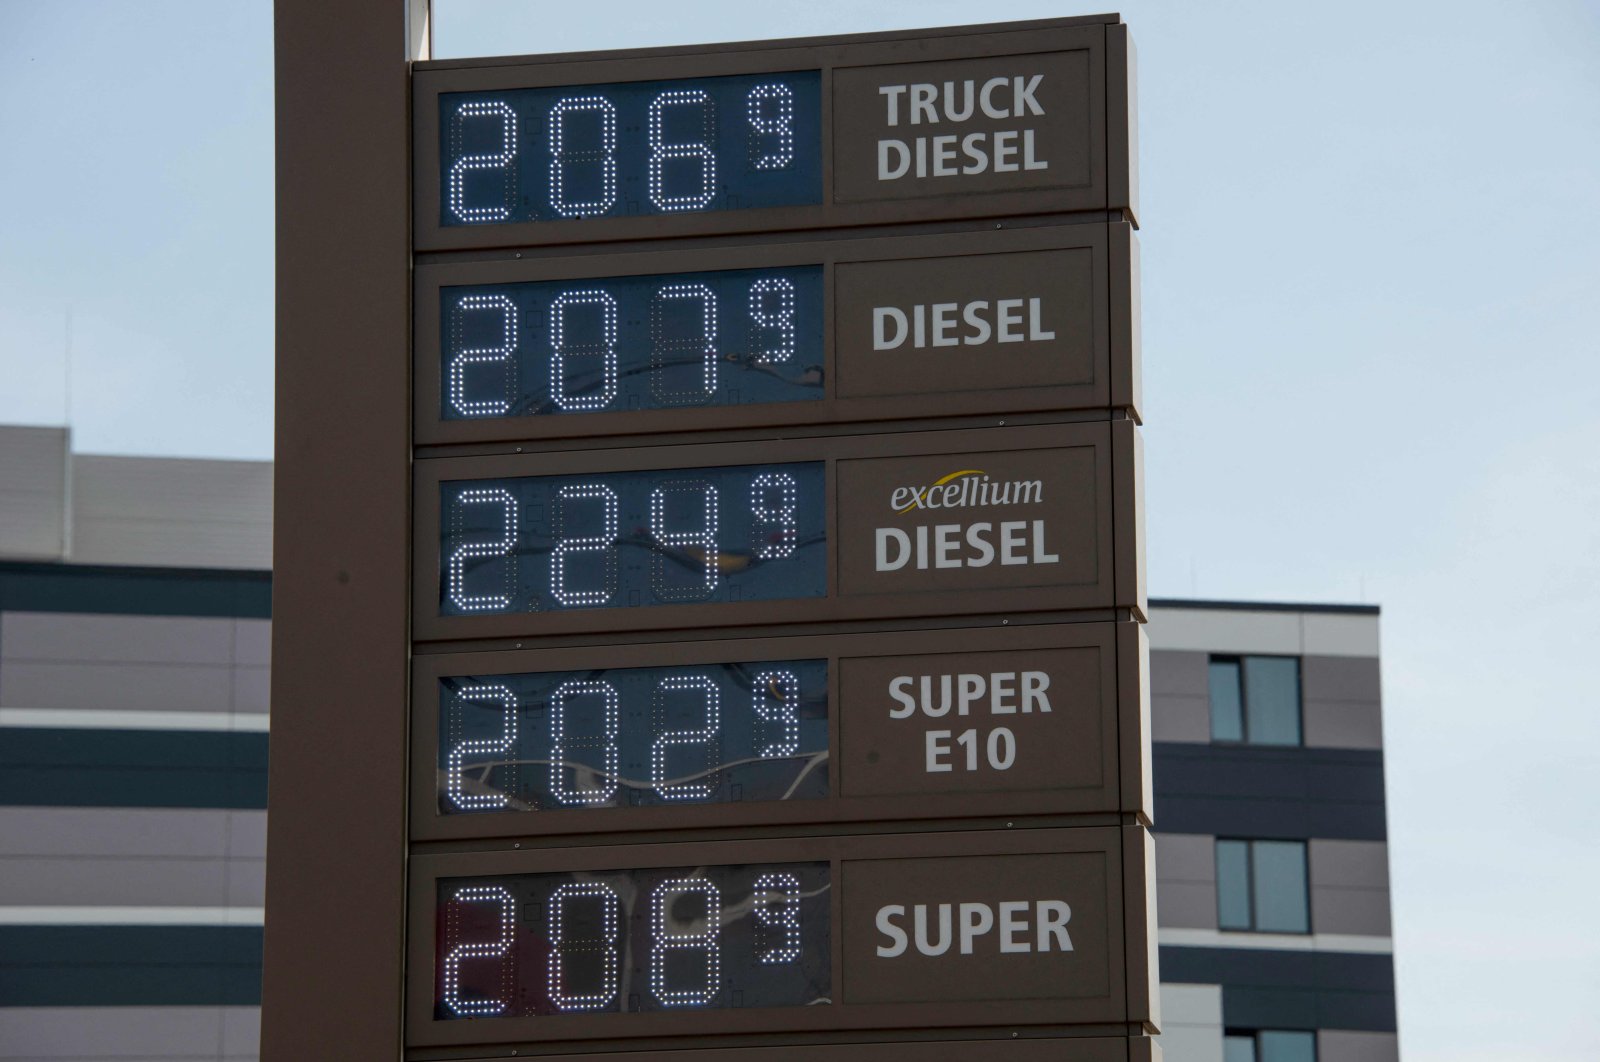 Fuel prices are seen on an electronic display at an oil and gas station in Berlin, Germany, April 29, 2022. (AFP Photo)